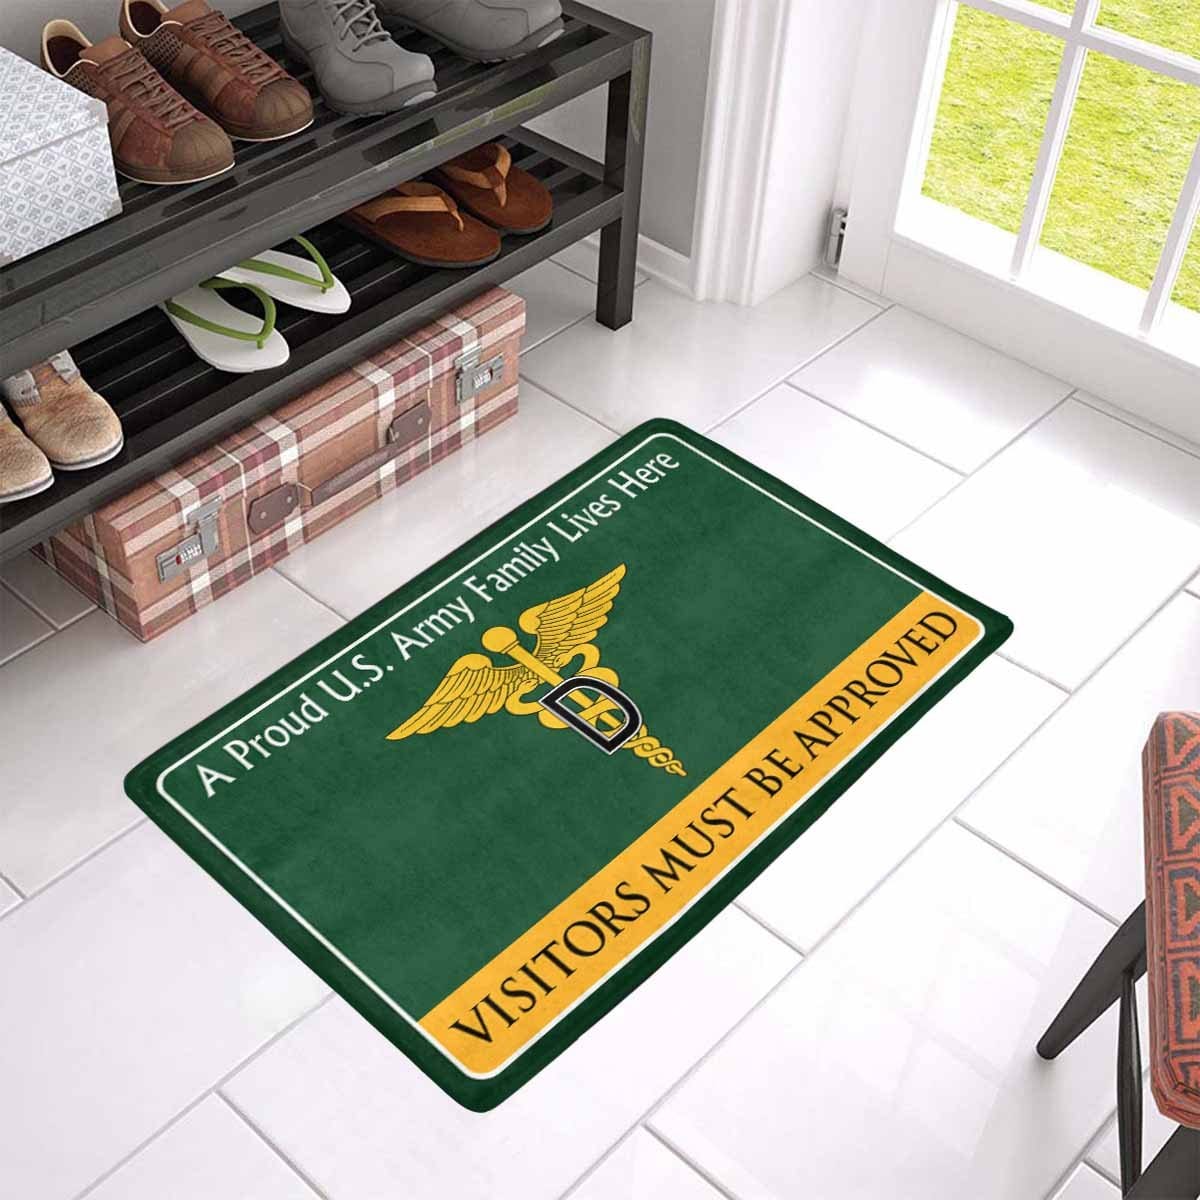 U.S. Army Dental Corps Family Doormat - Visitors must be approved Doormat (23.6 inches x 15.7 inches)-Doormat-Army-Branch-Veterans Nation